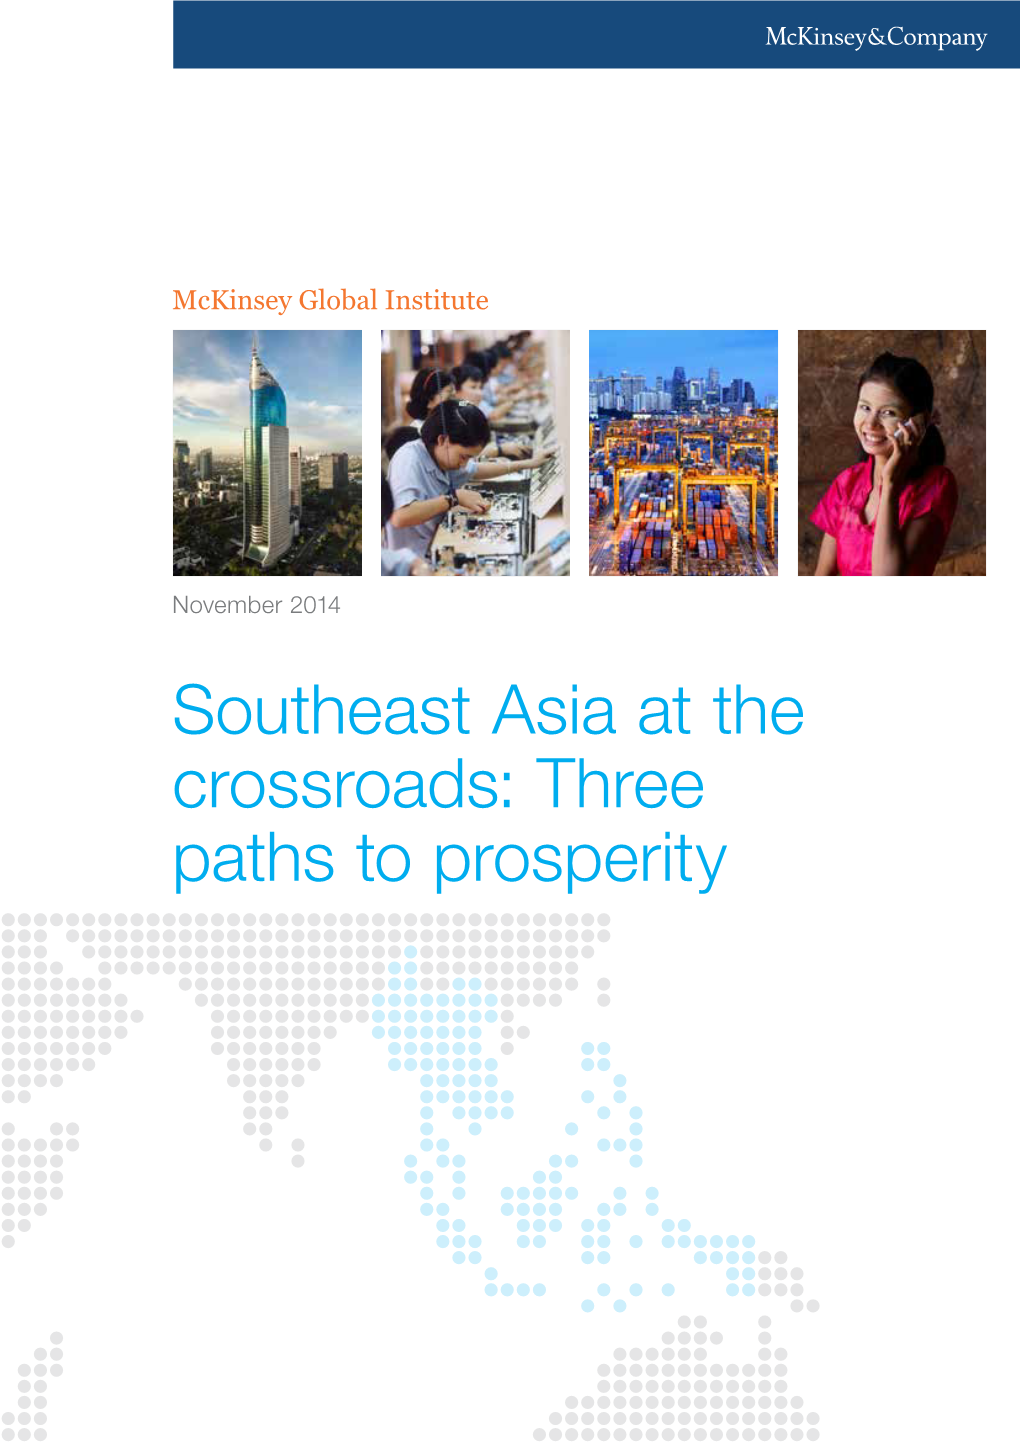 Southeast Asia at the Crossroads: Three Paths to Prosperity to Paths Prosperity Three Crossroads: at the Asia Southeast